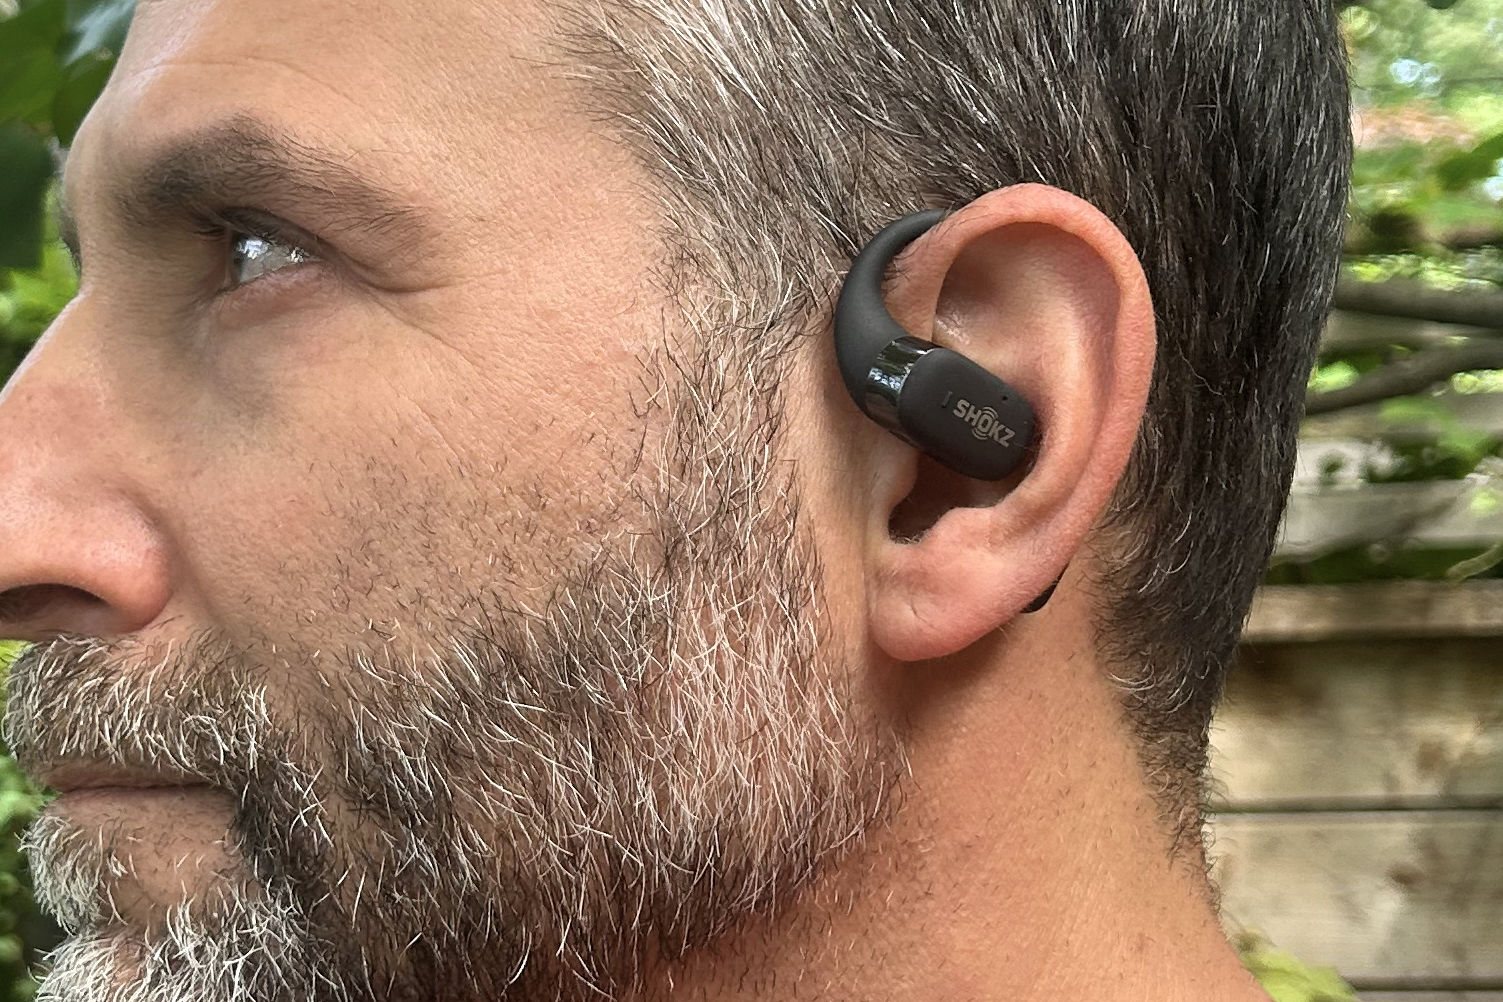 The best open-ear earbuds and headphones for 2023